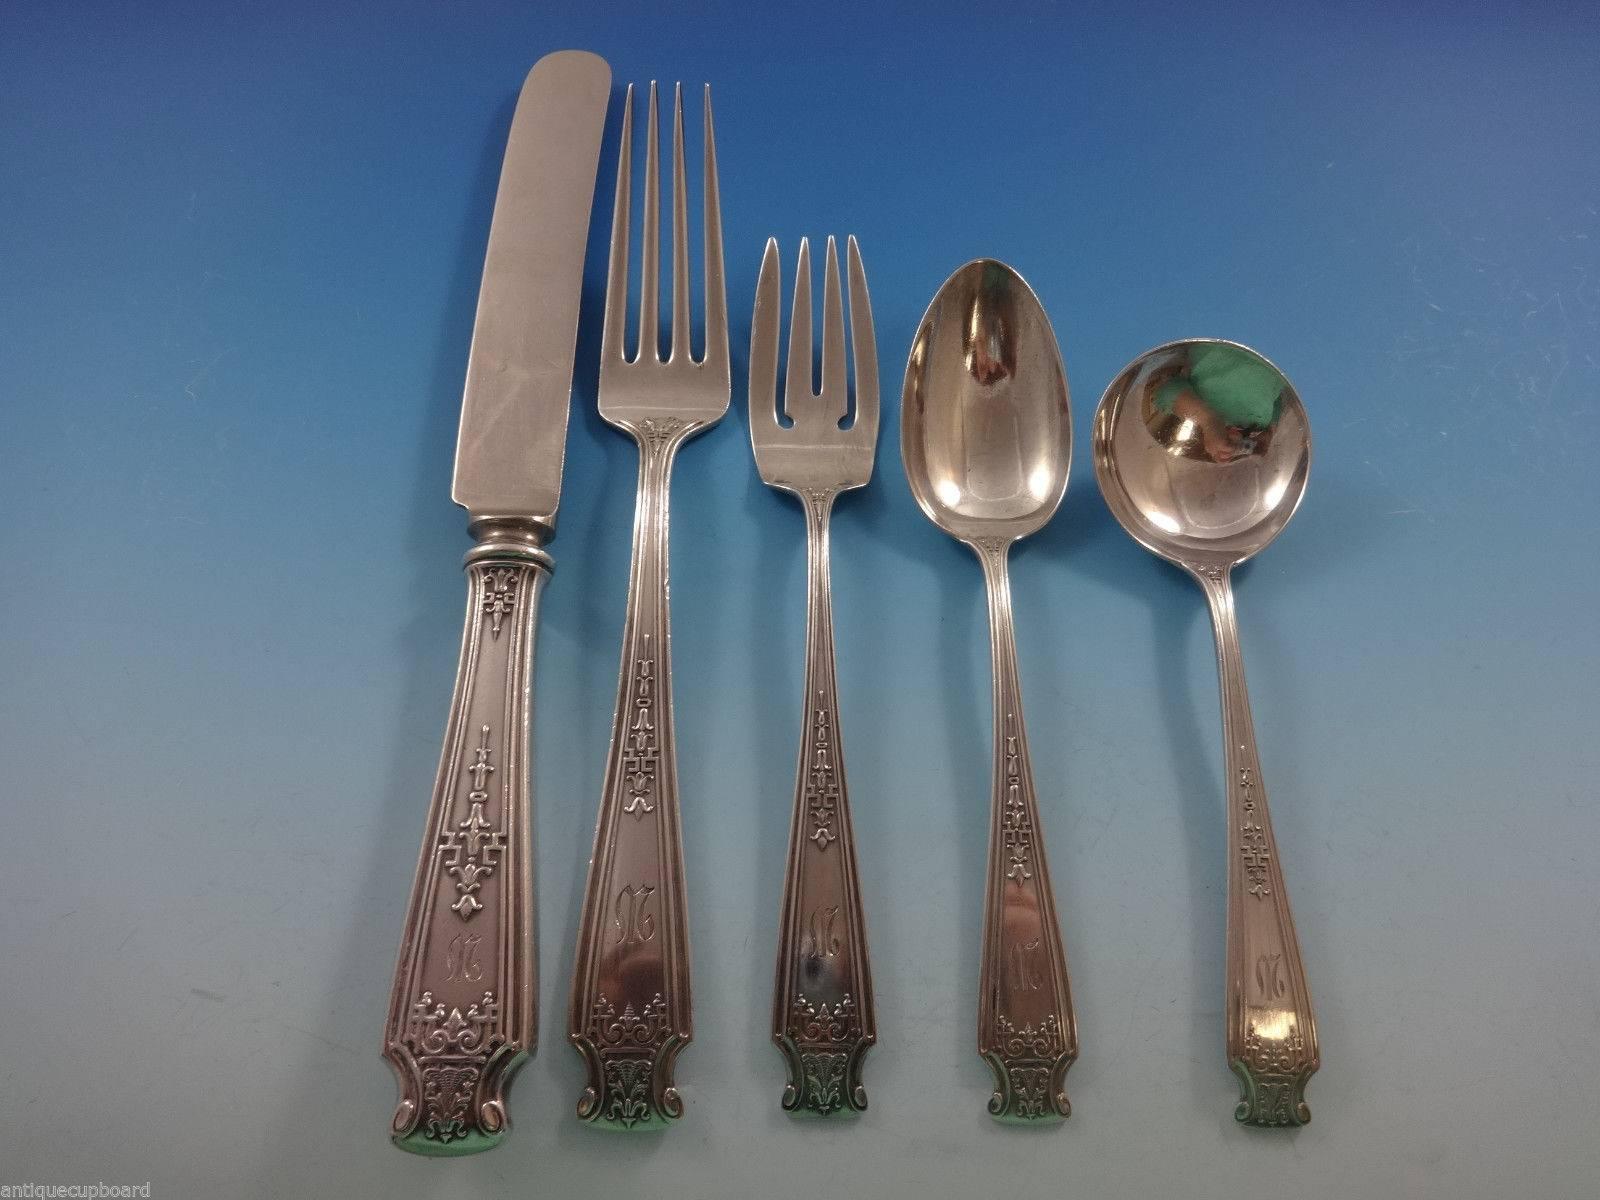 Rare Mandarin by Whiting sterling silver flatware set of 74 pieces. This set includes:

12 knives, 8 5/8